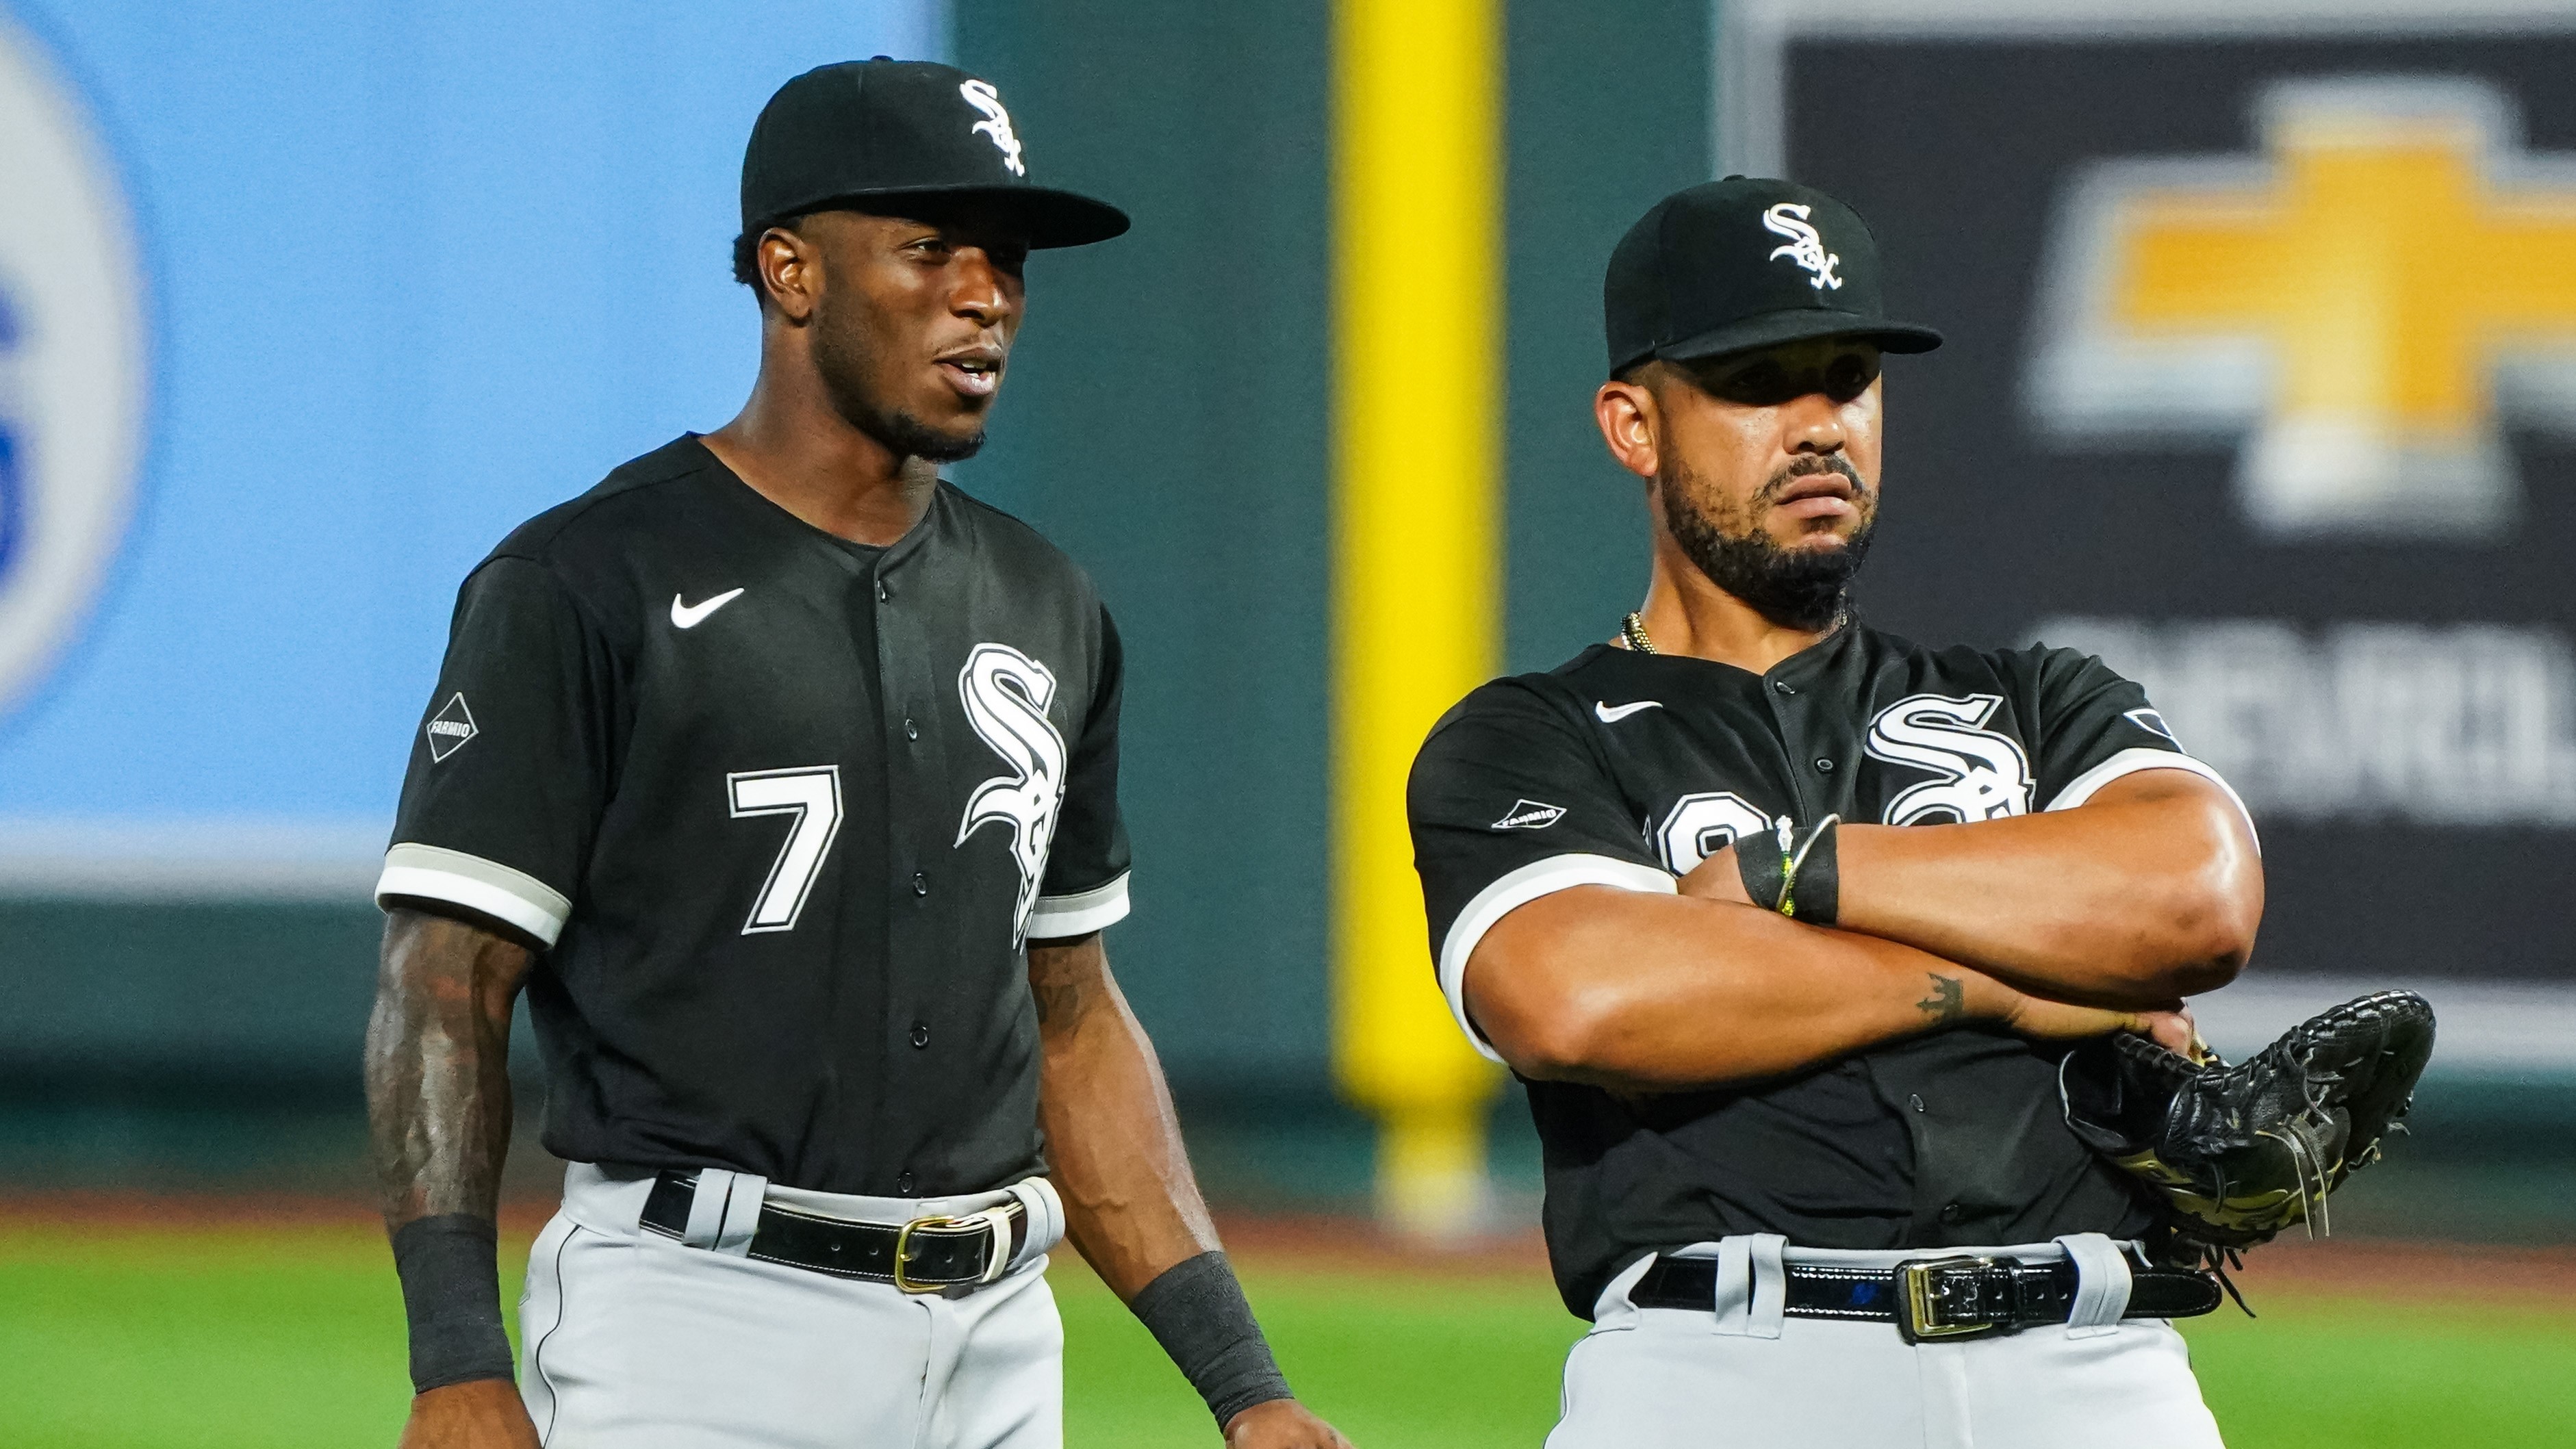 White Sox questions for 2021 season